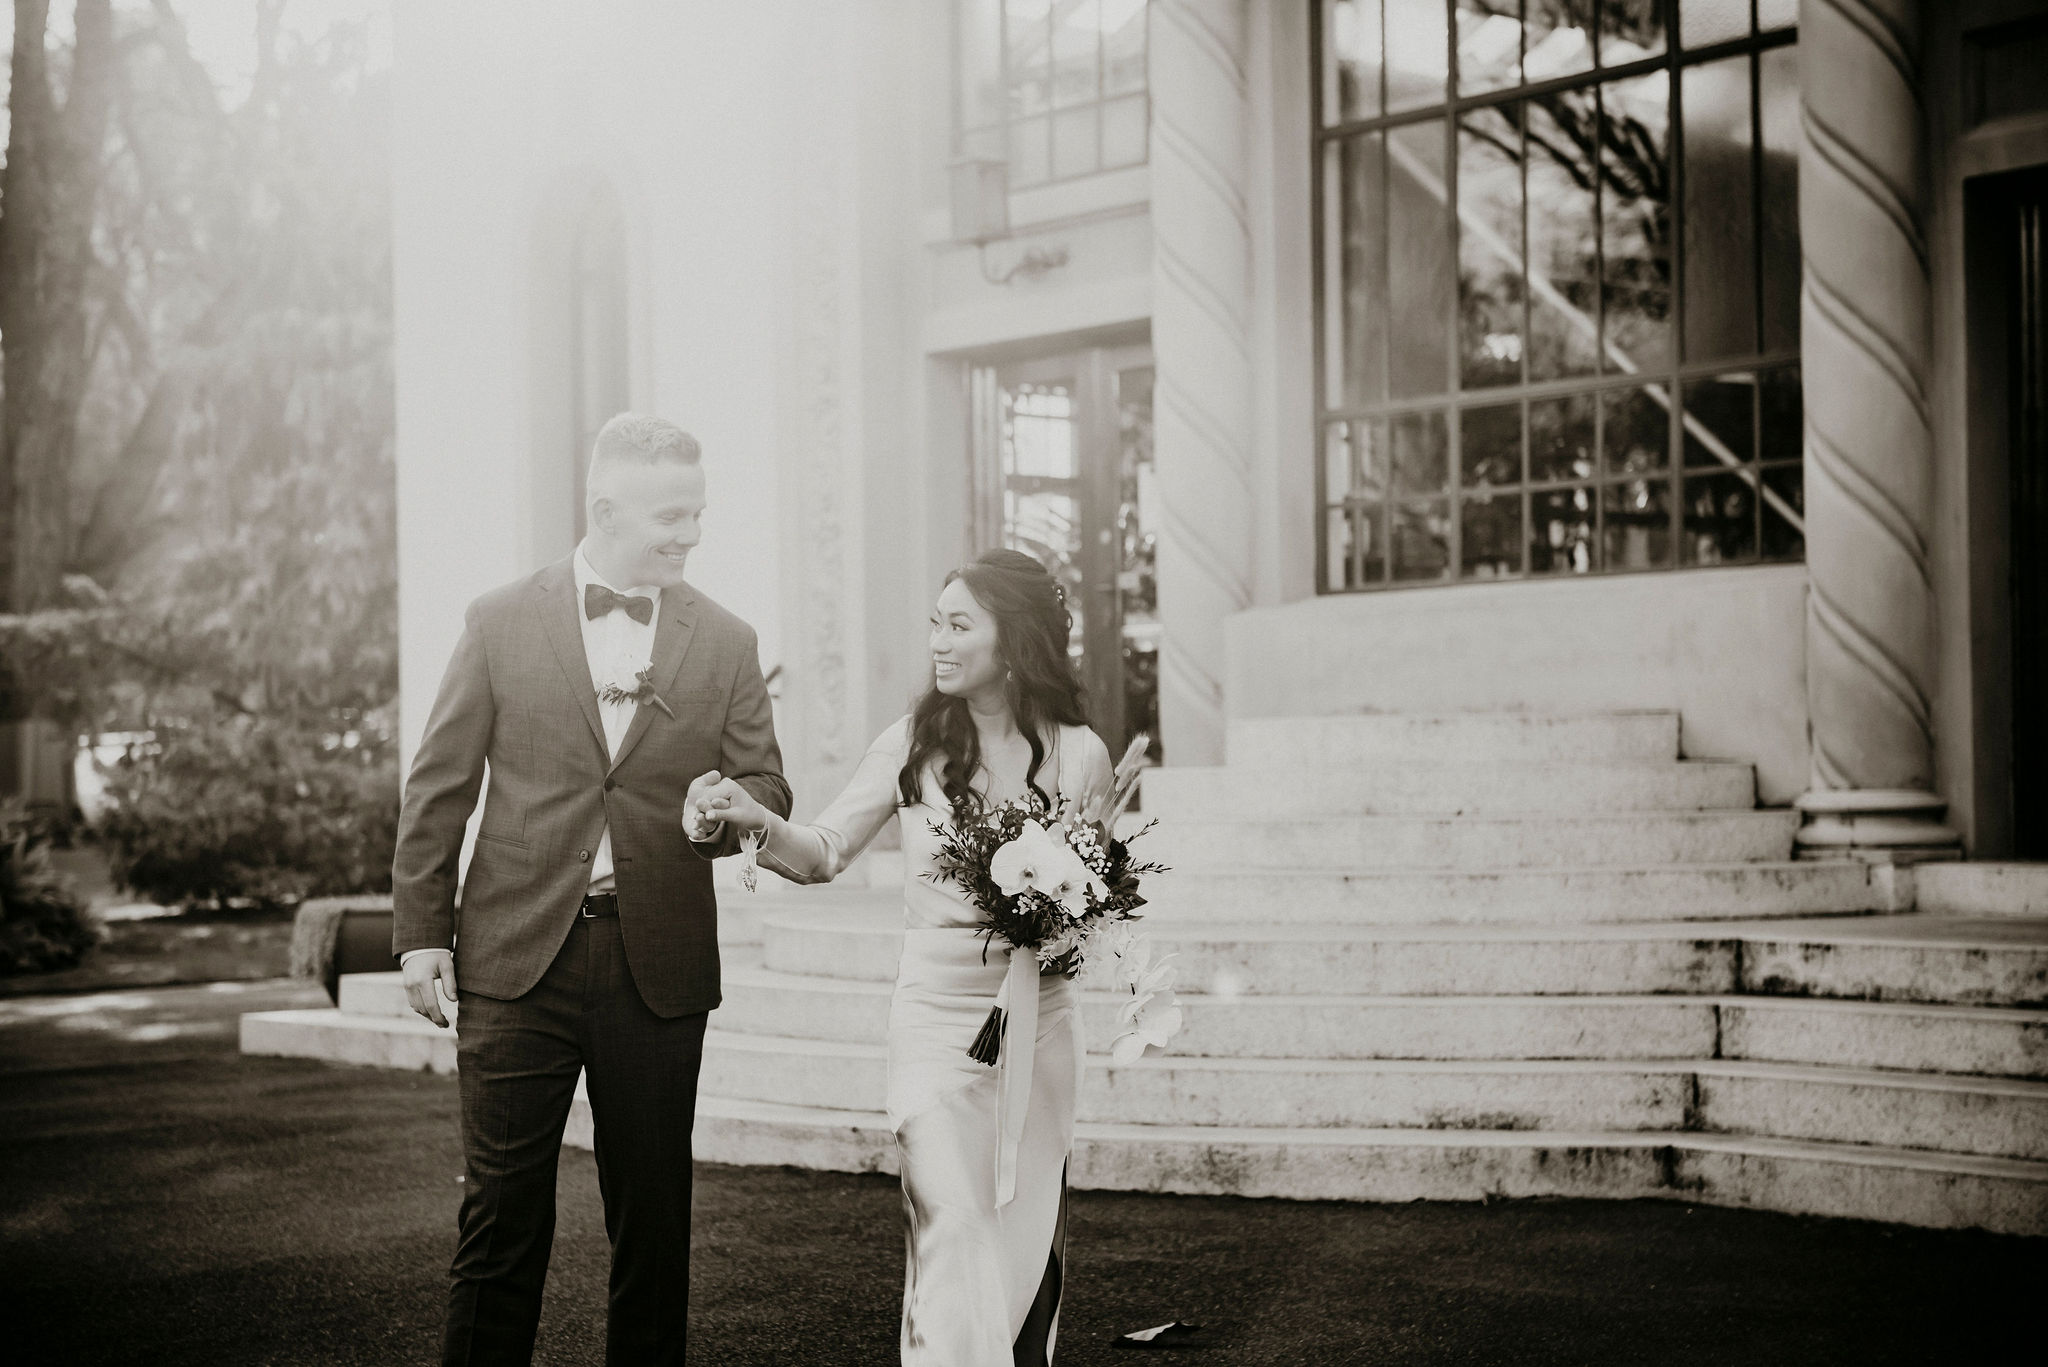 Couple walks holding hand with sun flare in front of conservatory in the Fitzroy Gardens Melbourne Ceremony and Photography - simple yet elegant ceremony which can be personalised and packaged with beautiful photography you will cherish forever Lets Elope Melbourne Celebrant Photographer Elopement Packages Victoria Sarah Matler City Wedding Photos